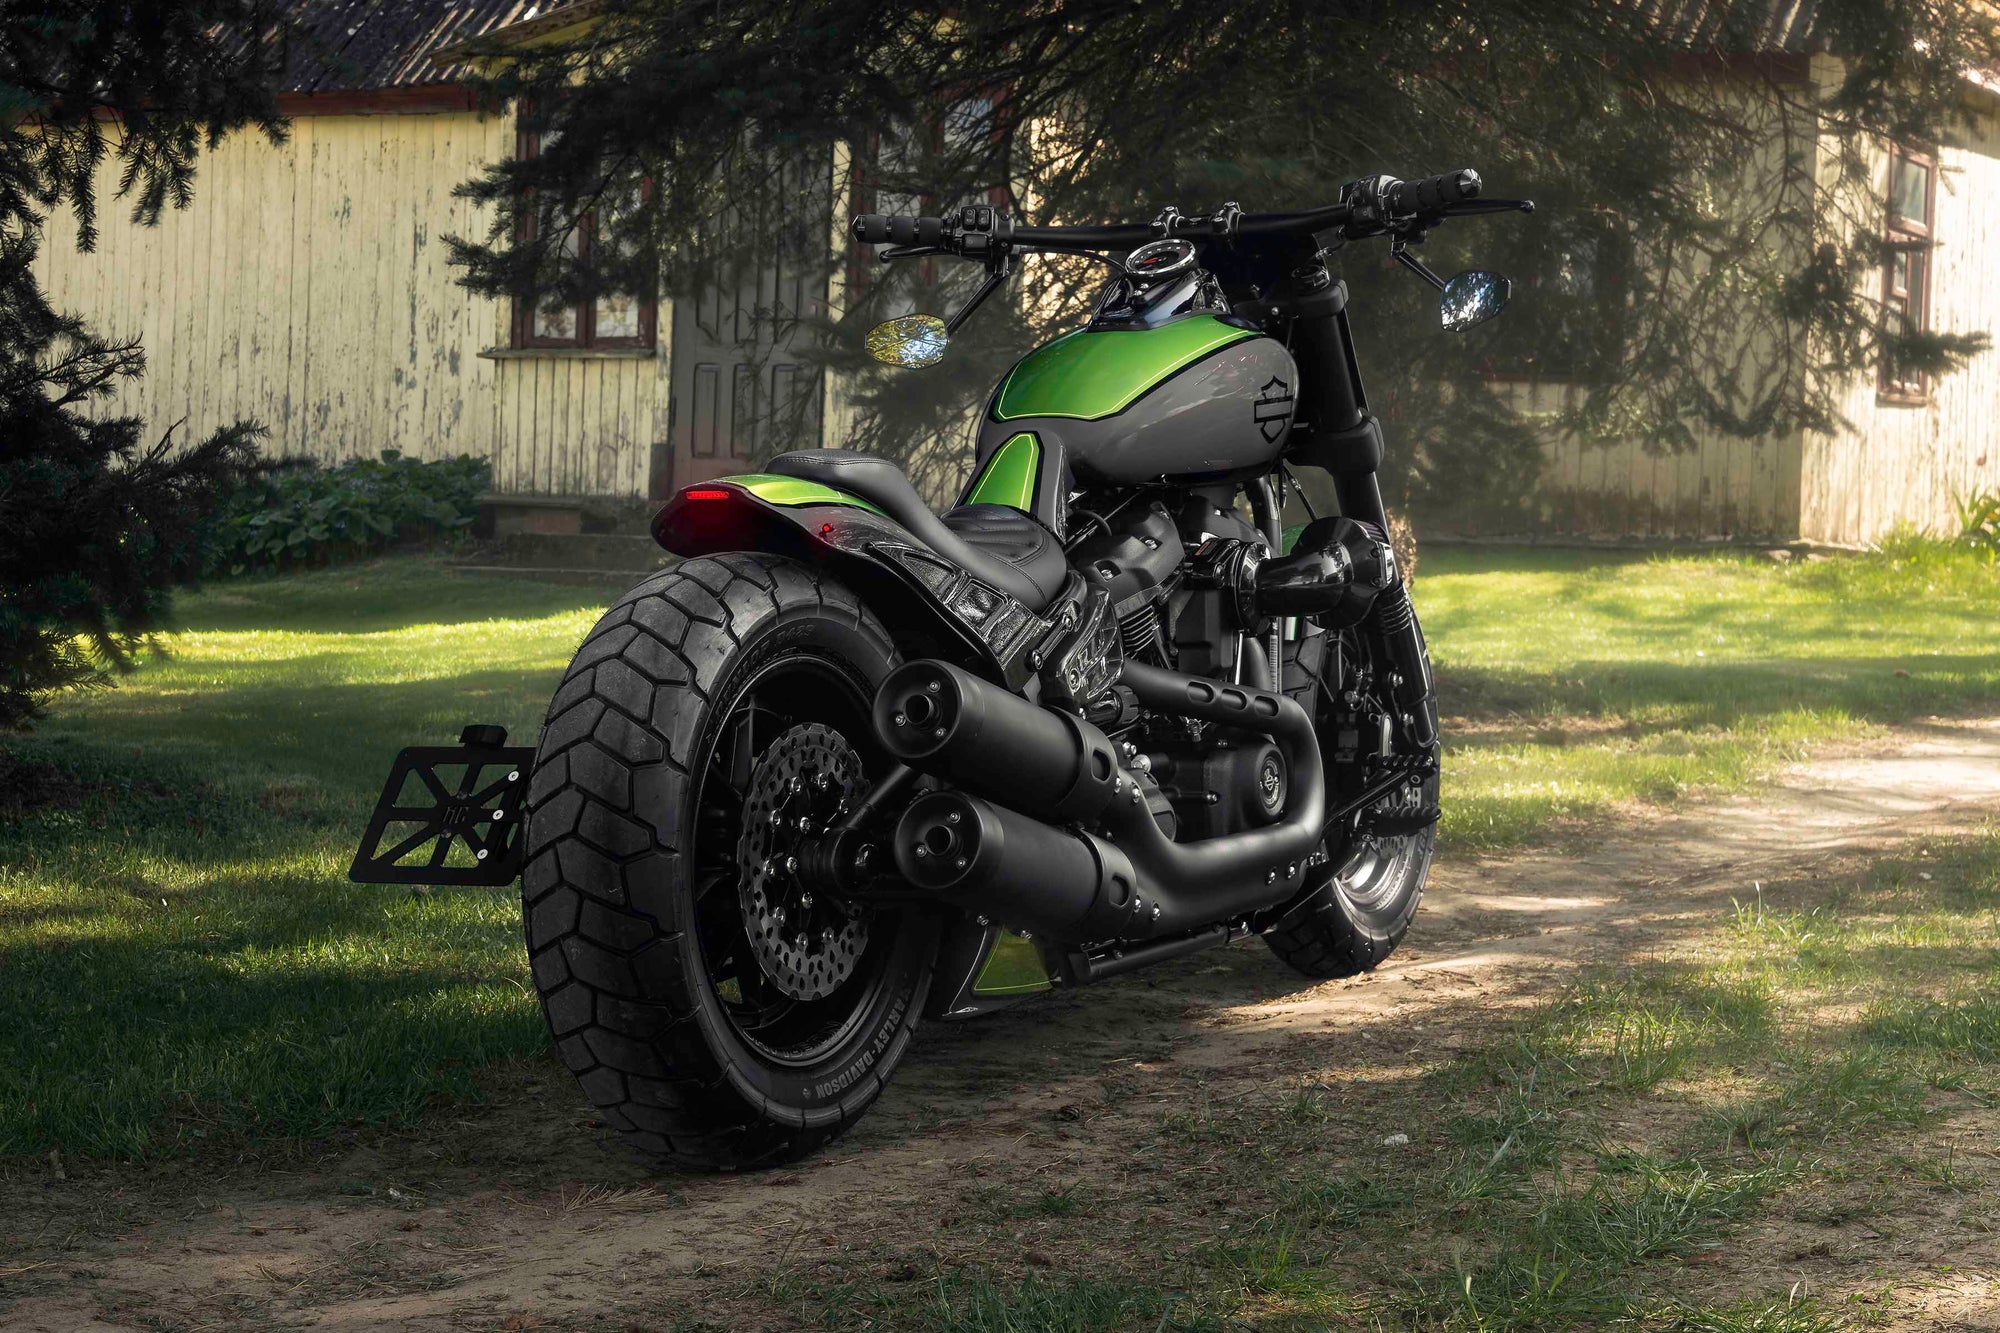 Modified Harley Davidson Fat Bob motorcycle with Killer Custom parts from the rear with a country house and some trees in the background